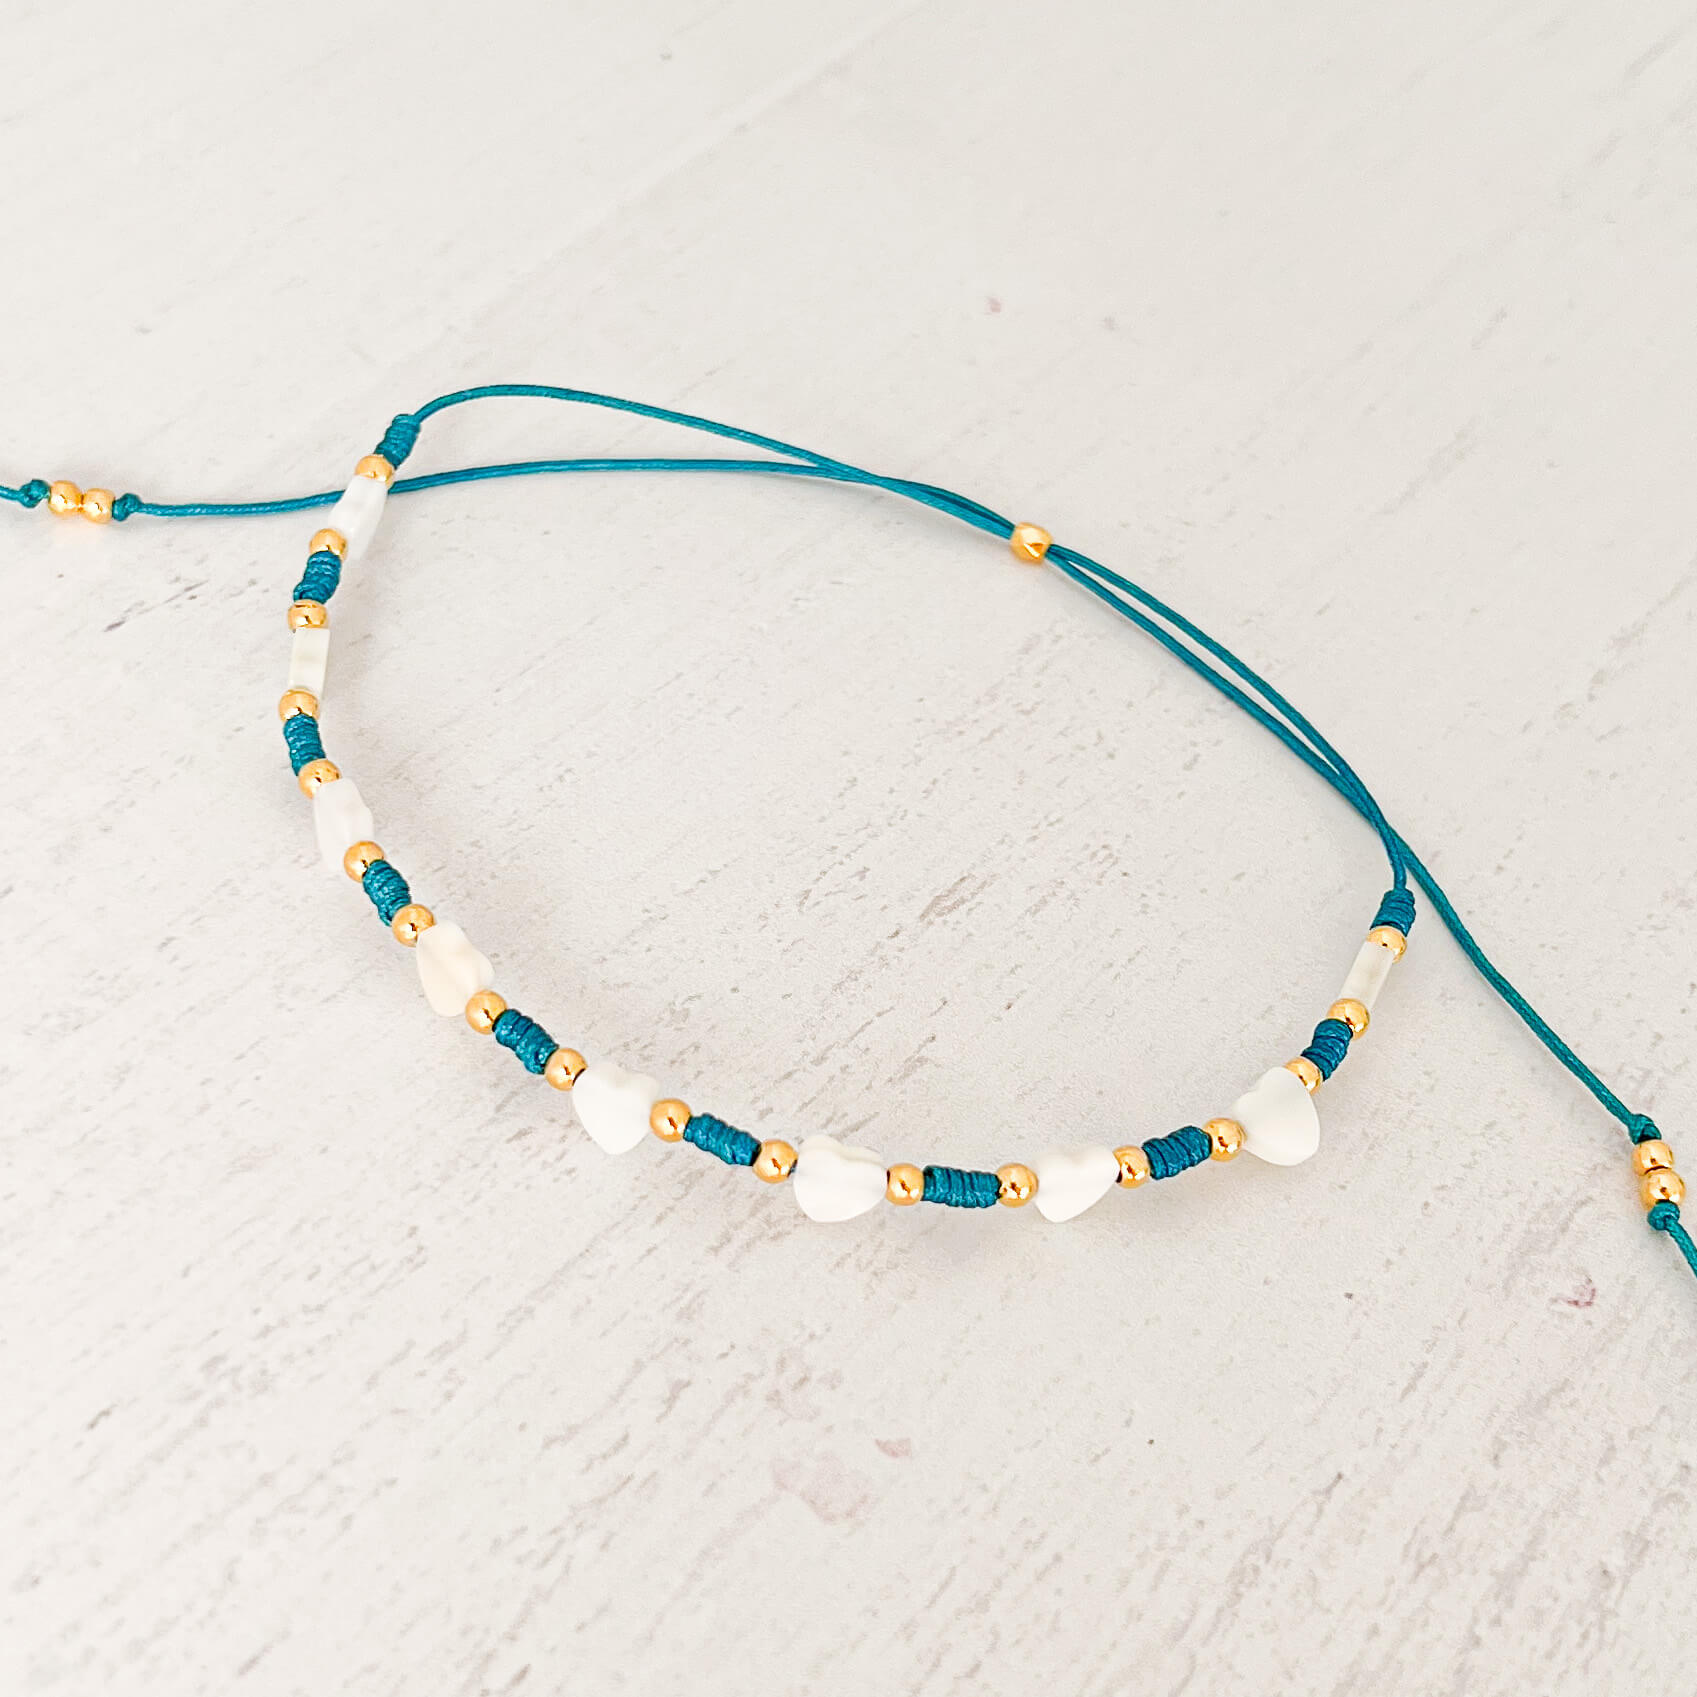 Heart Anklet with Dark Turquoise Yarn